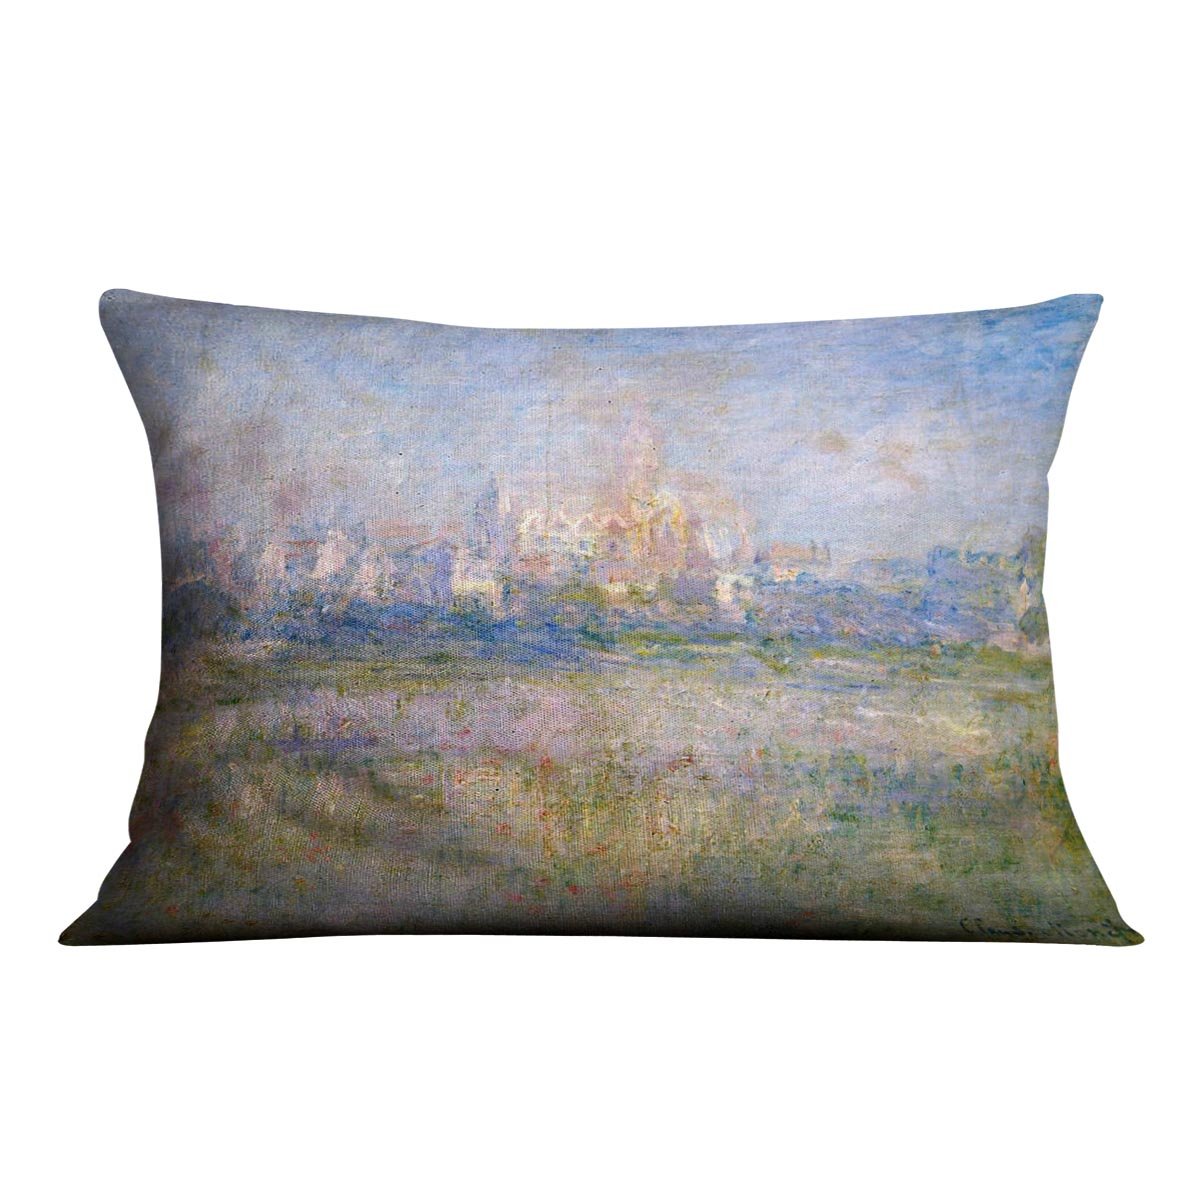 Vctheuil in the fog by Monet Throw Pillow